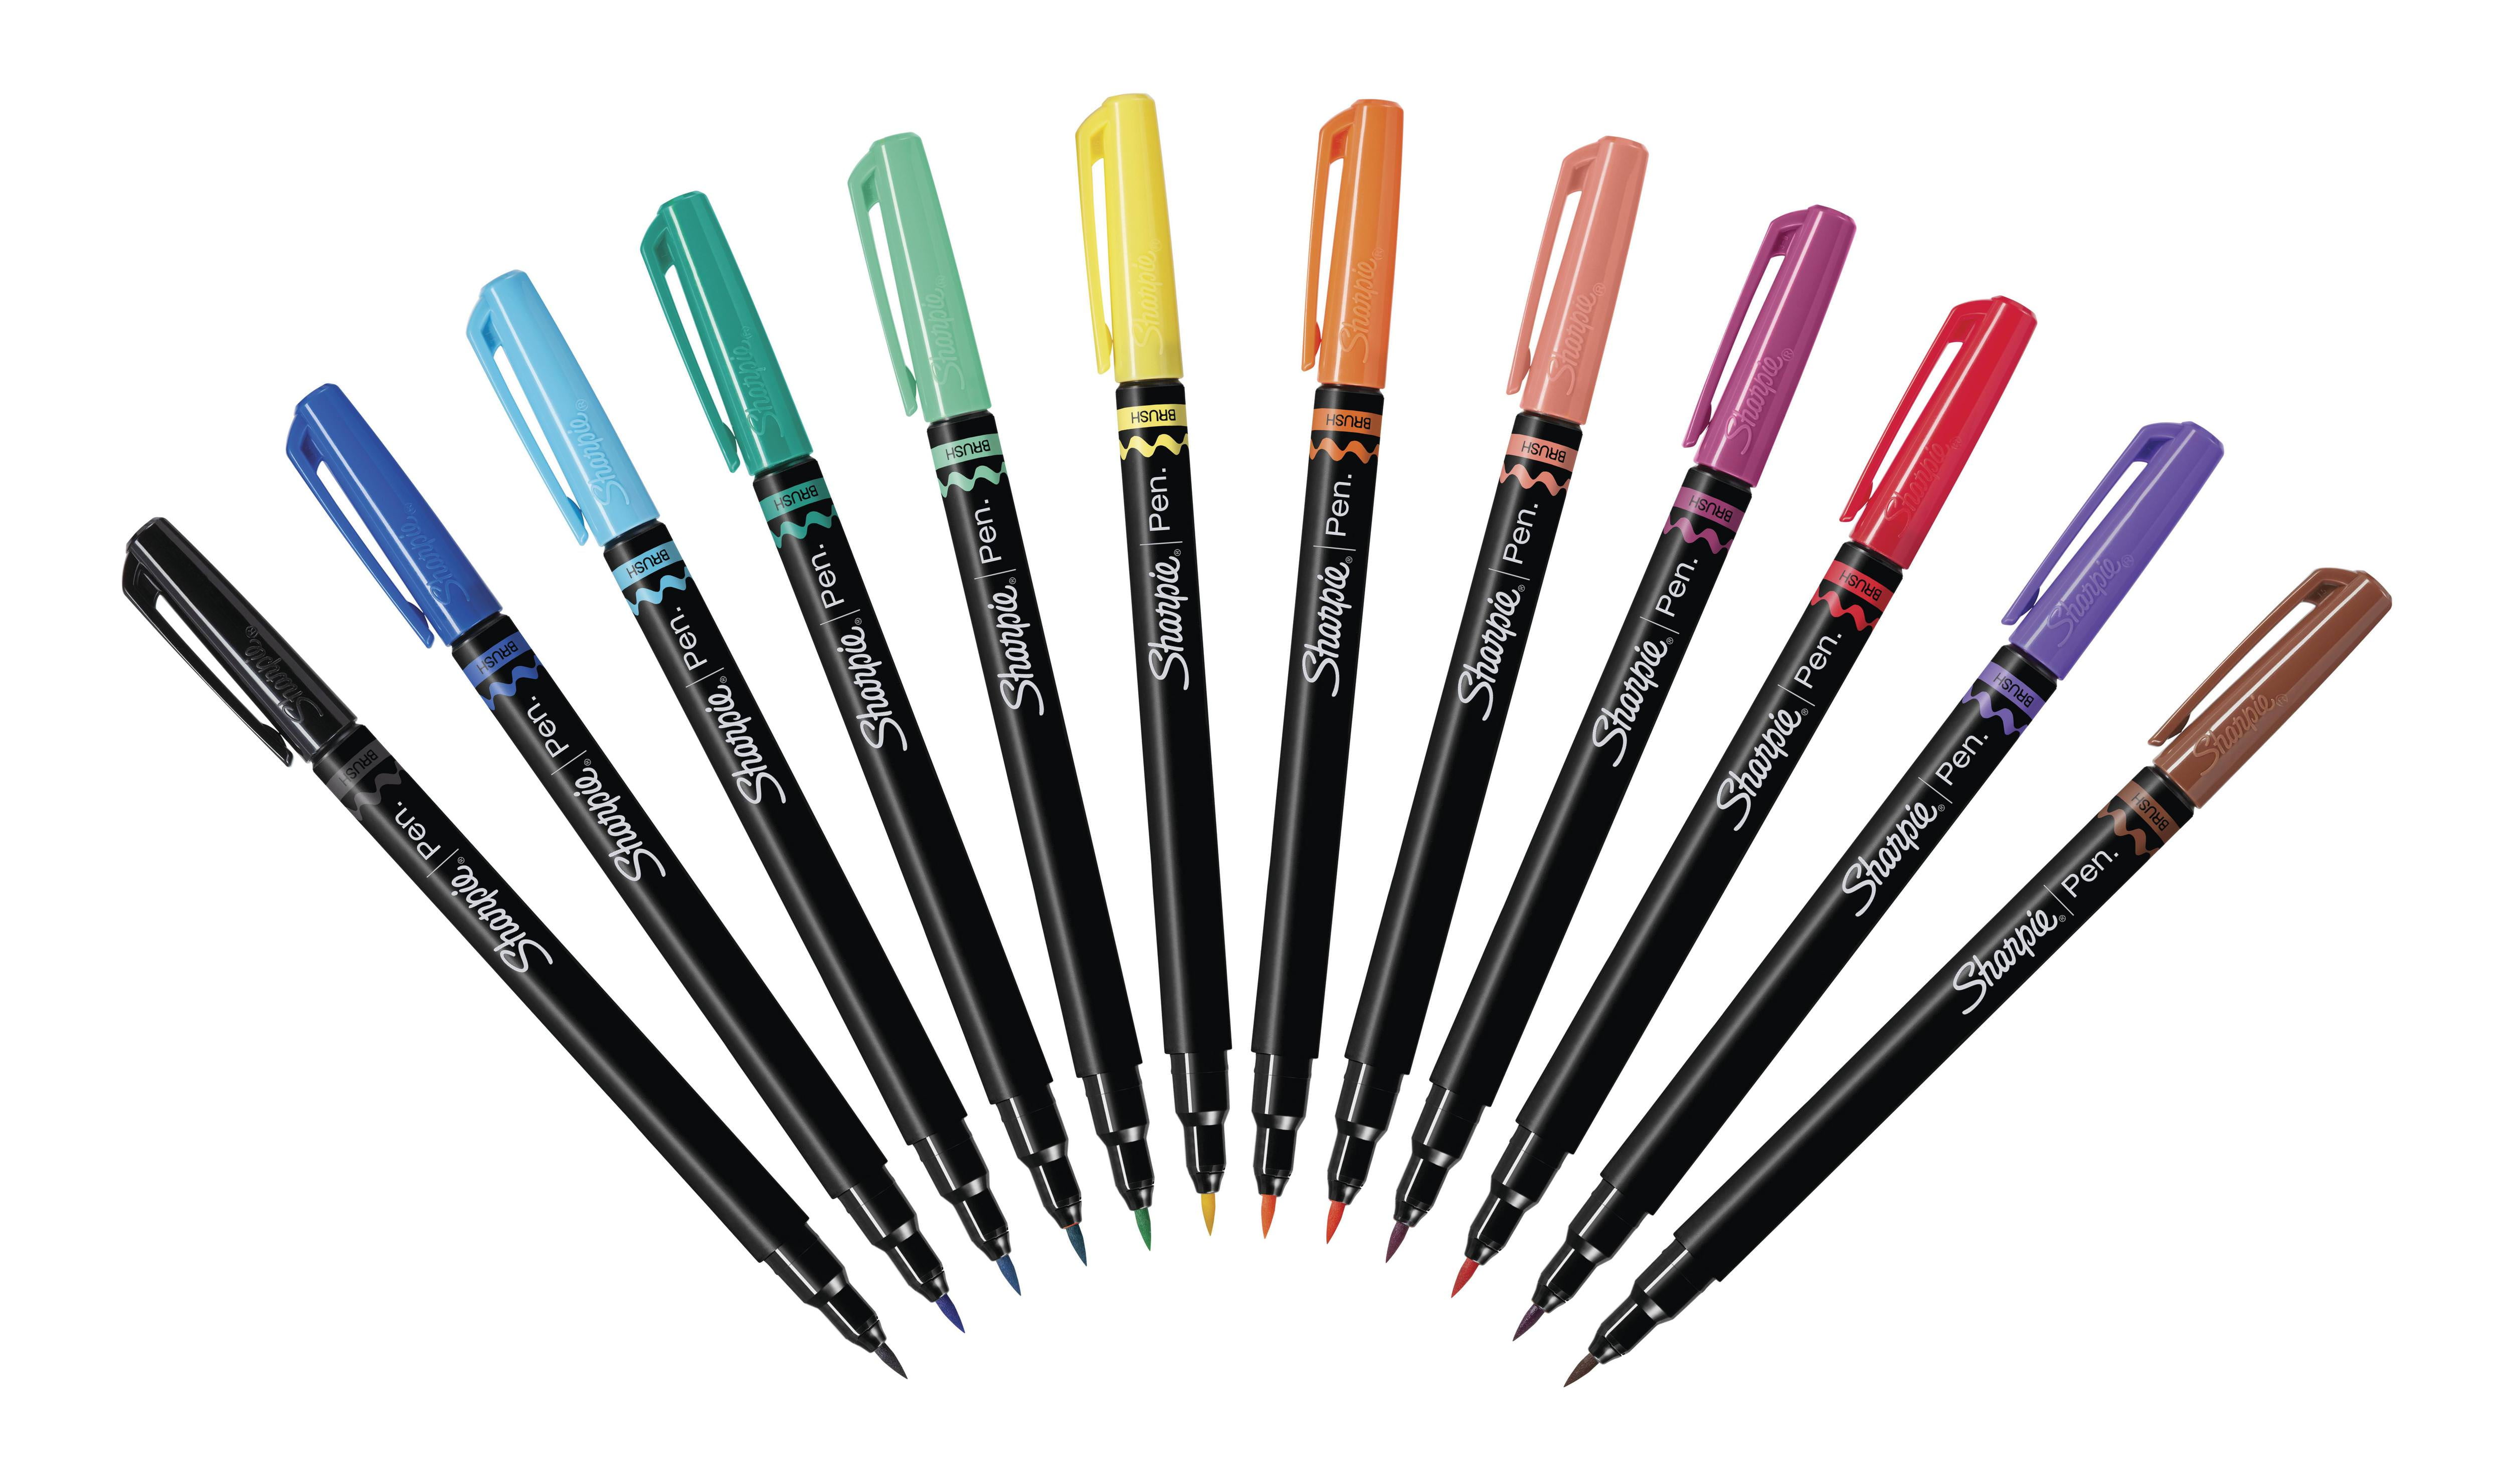 Sharpie Brush Tip Markers Berry Pack of 12